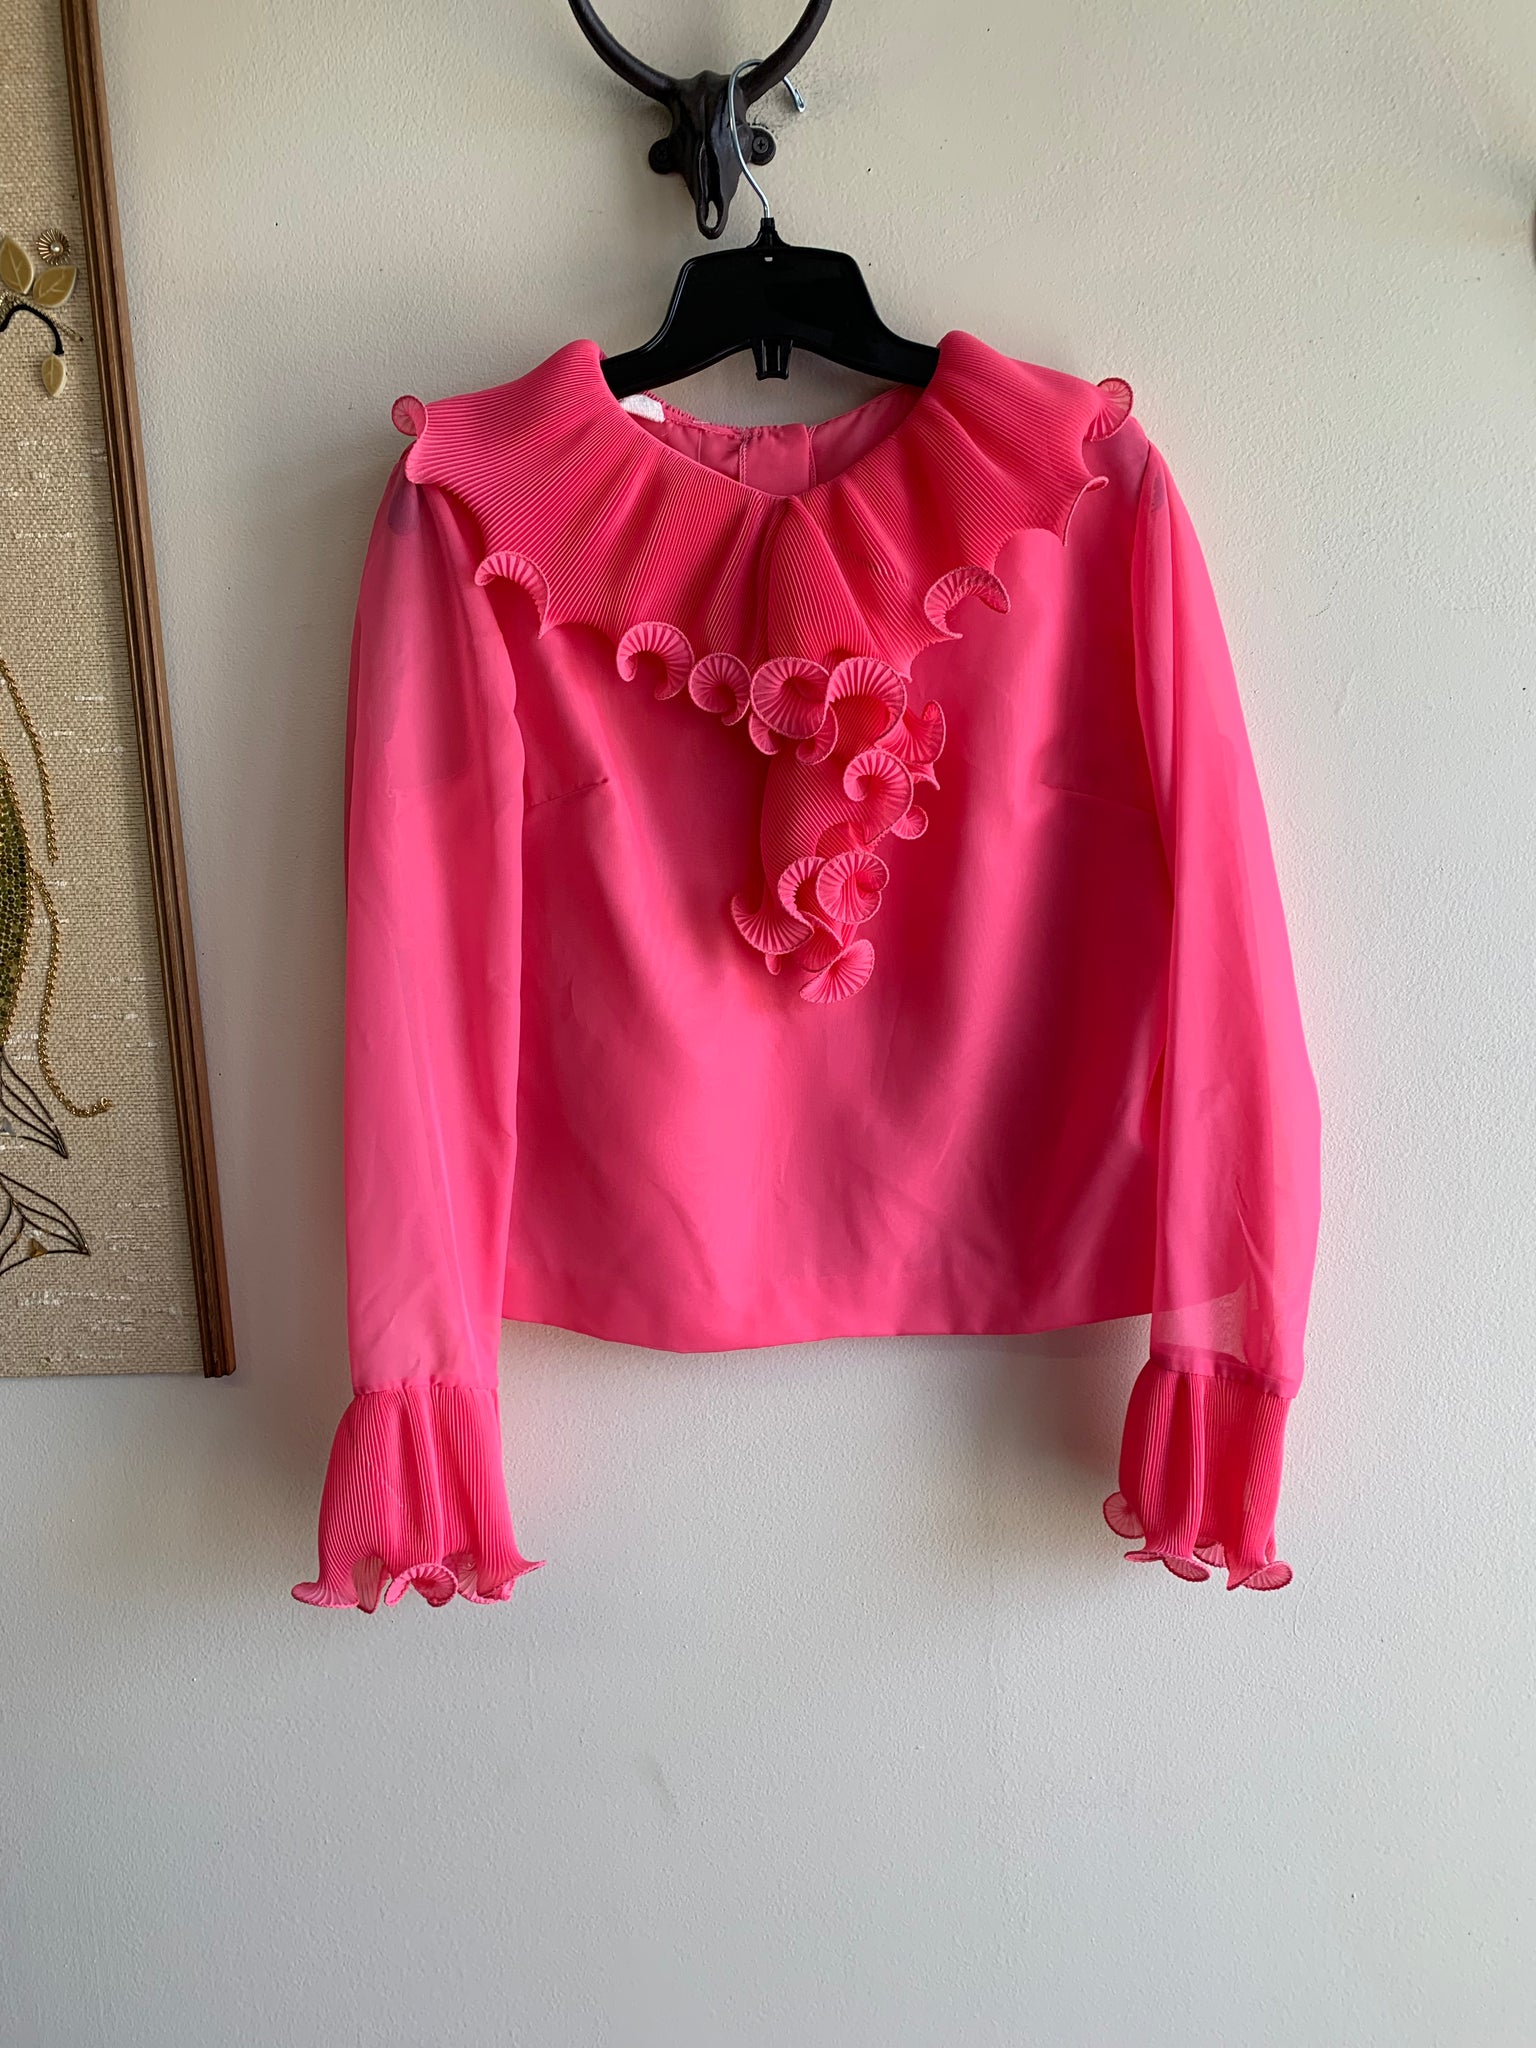 80s Extra Frilly Pink Top - M